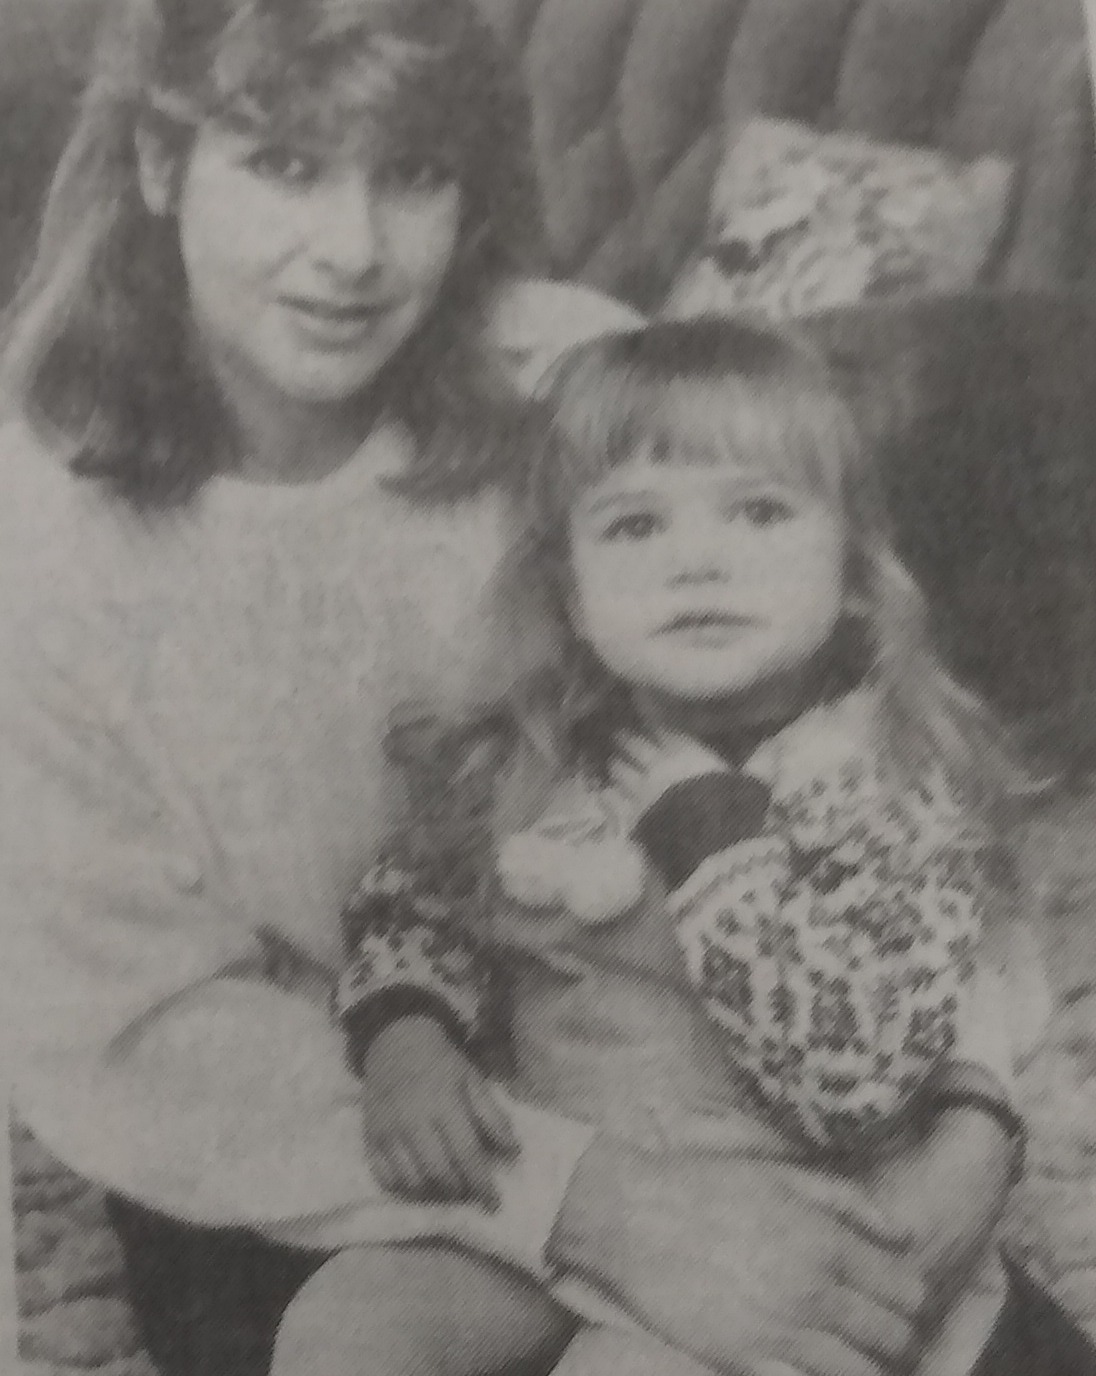 Sarah, who was two-years-old in 1988, with her mum, Diane